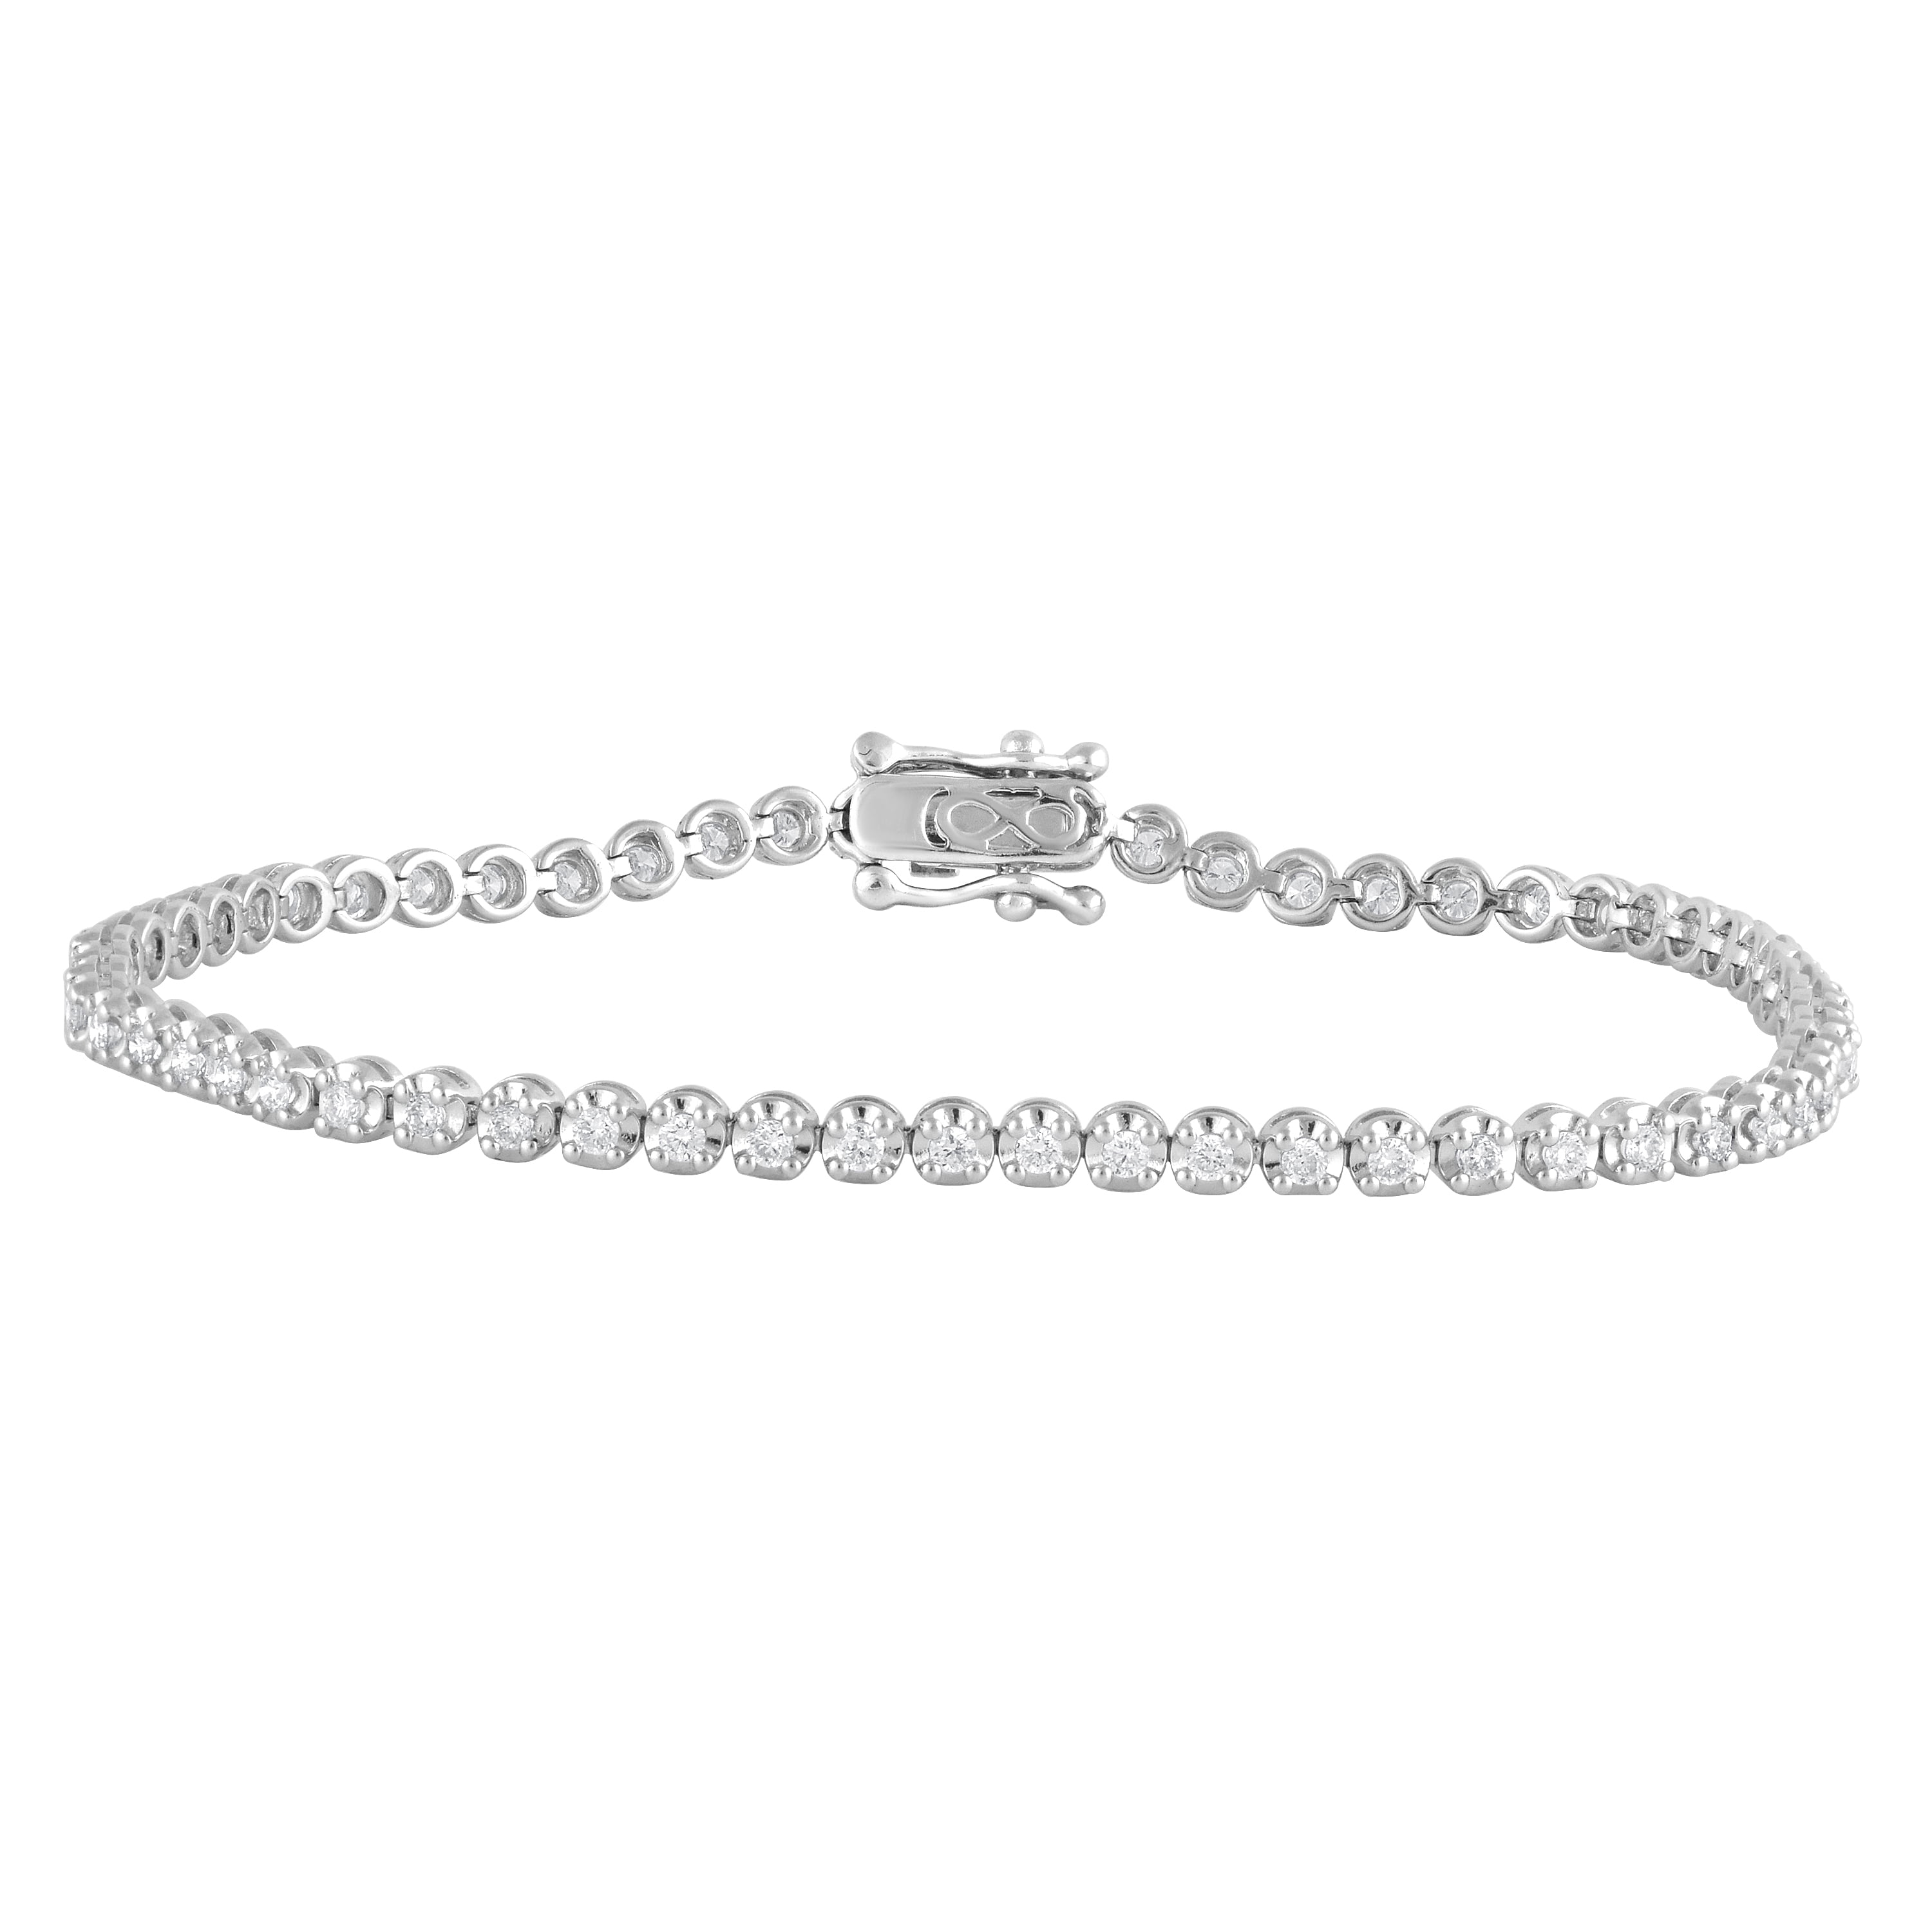 Buy Antique Dadis Club Lunch Bracelet In 925 Silver from Shaya by CaratLane